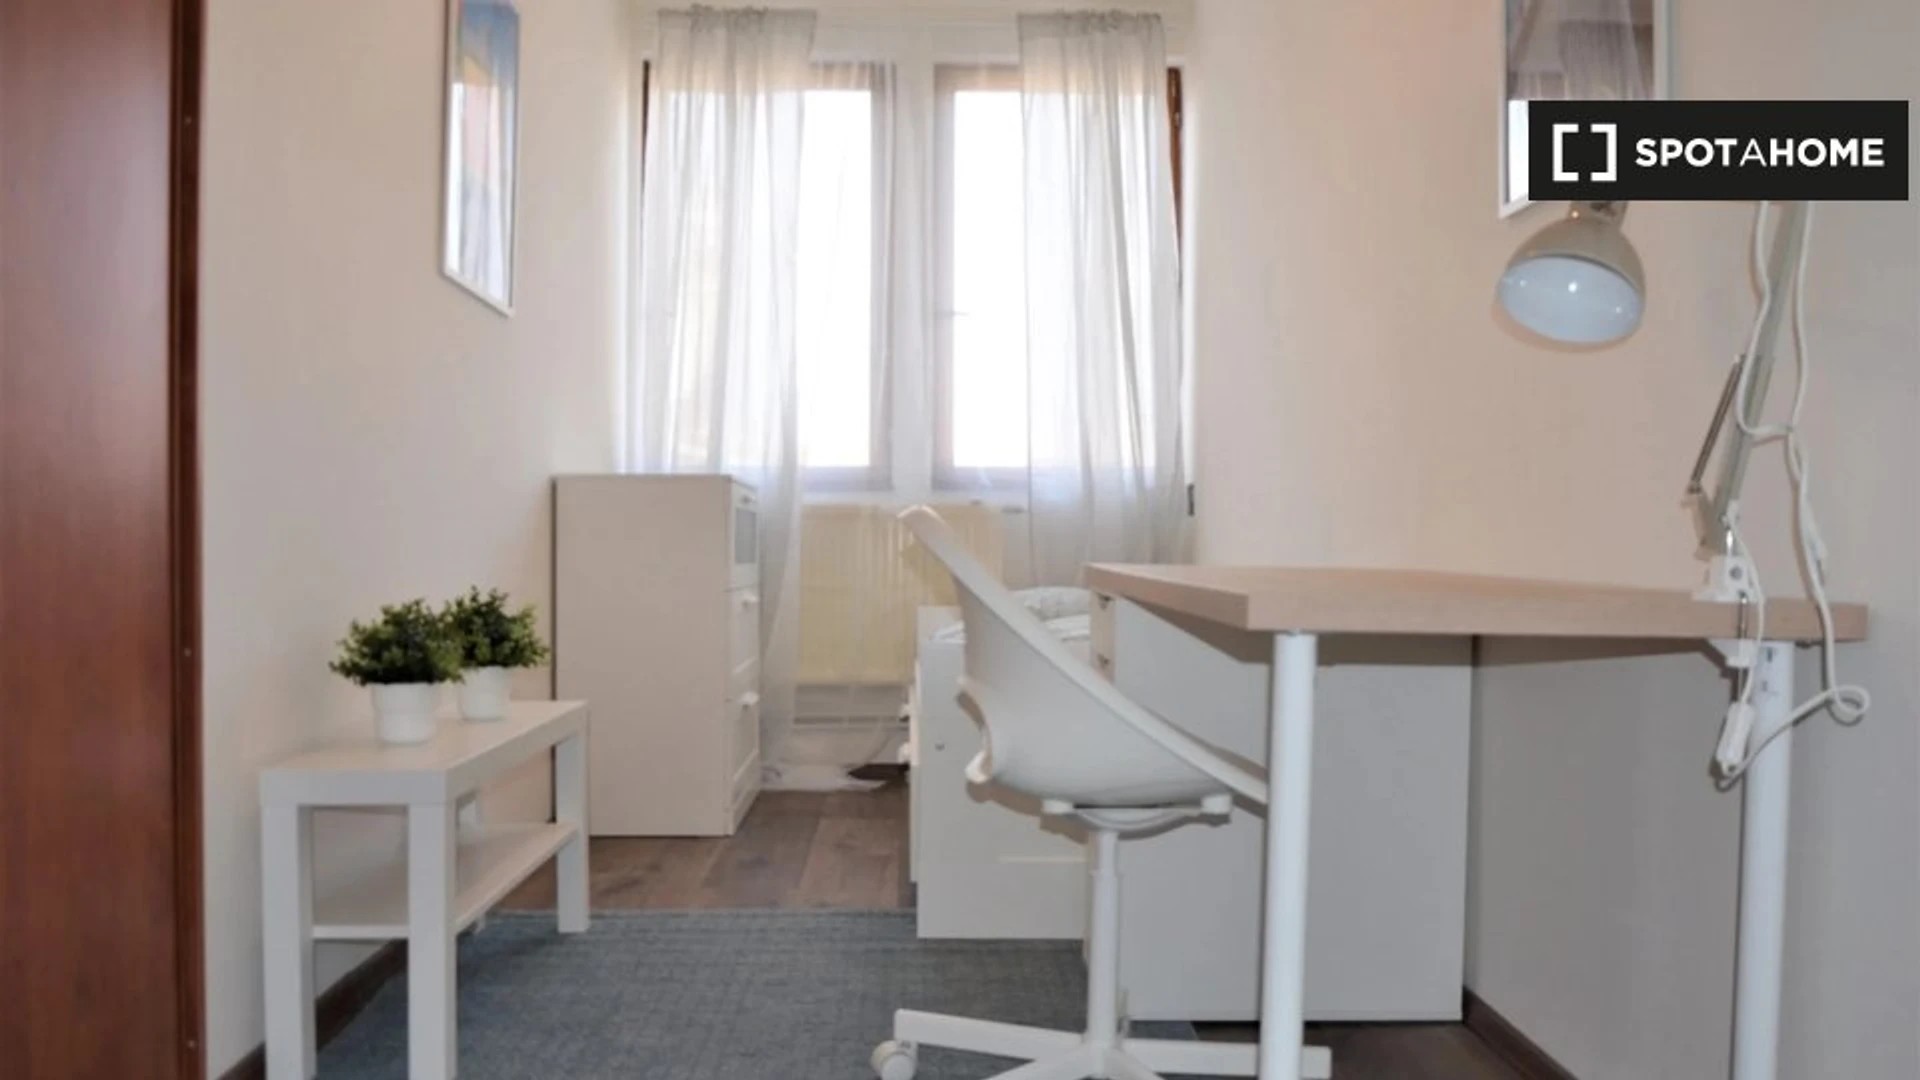 Room for rent with double bed Prague